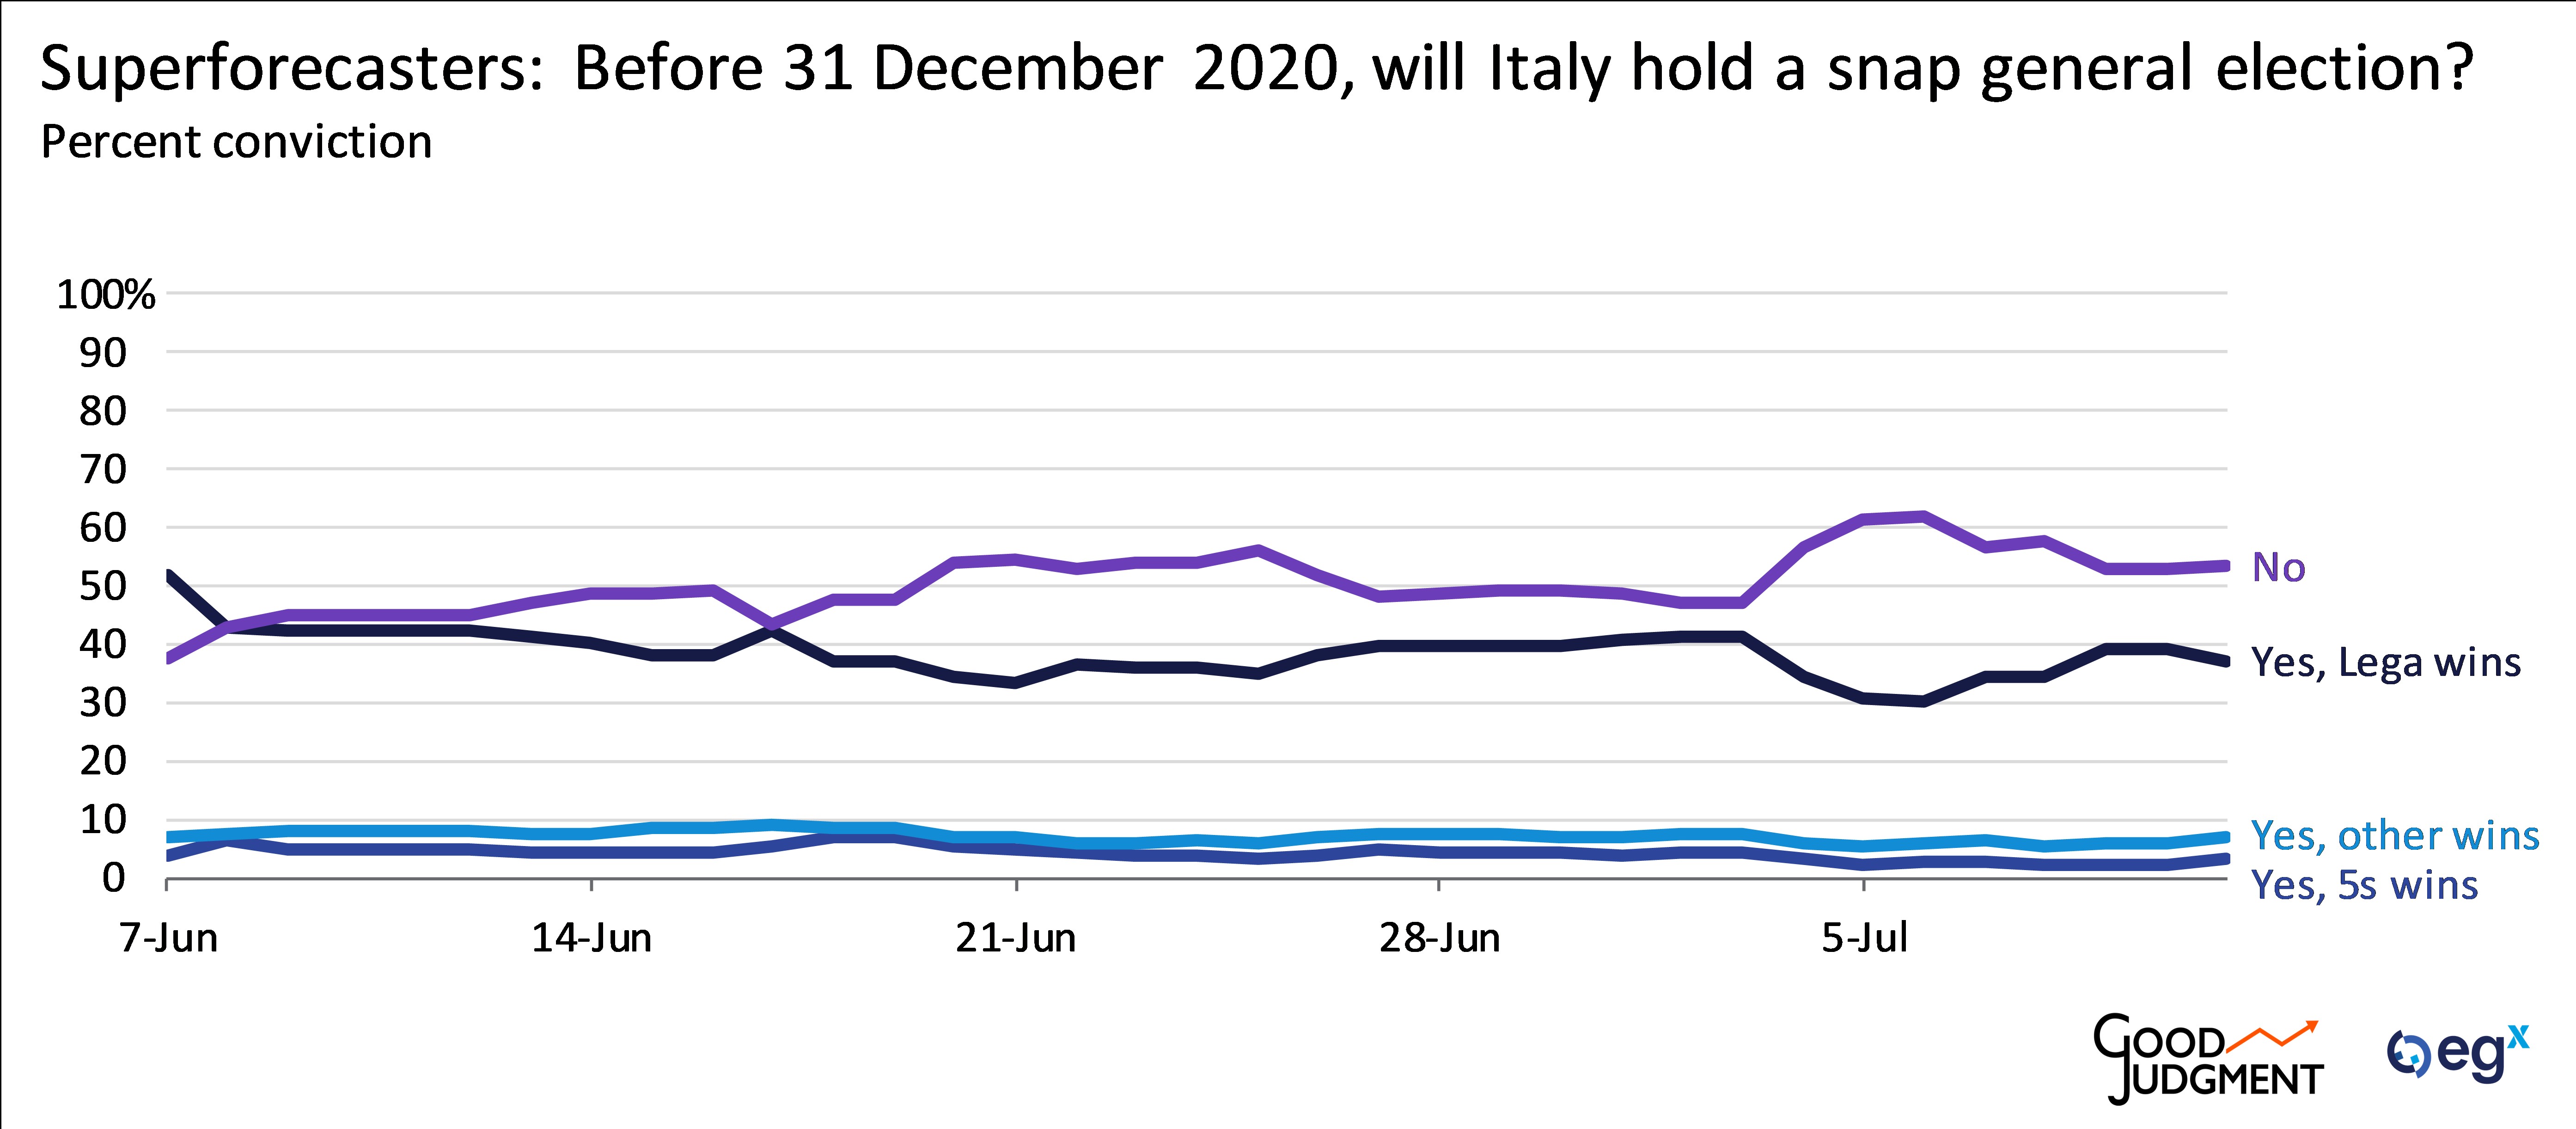 Superforecaster projecting the likelihood of Italy holding a snap general election before 31 December 2020.